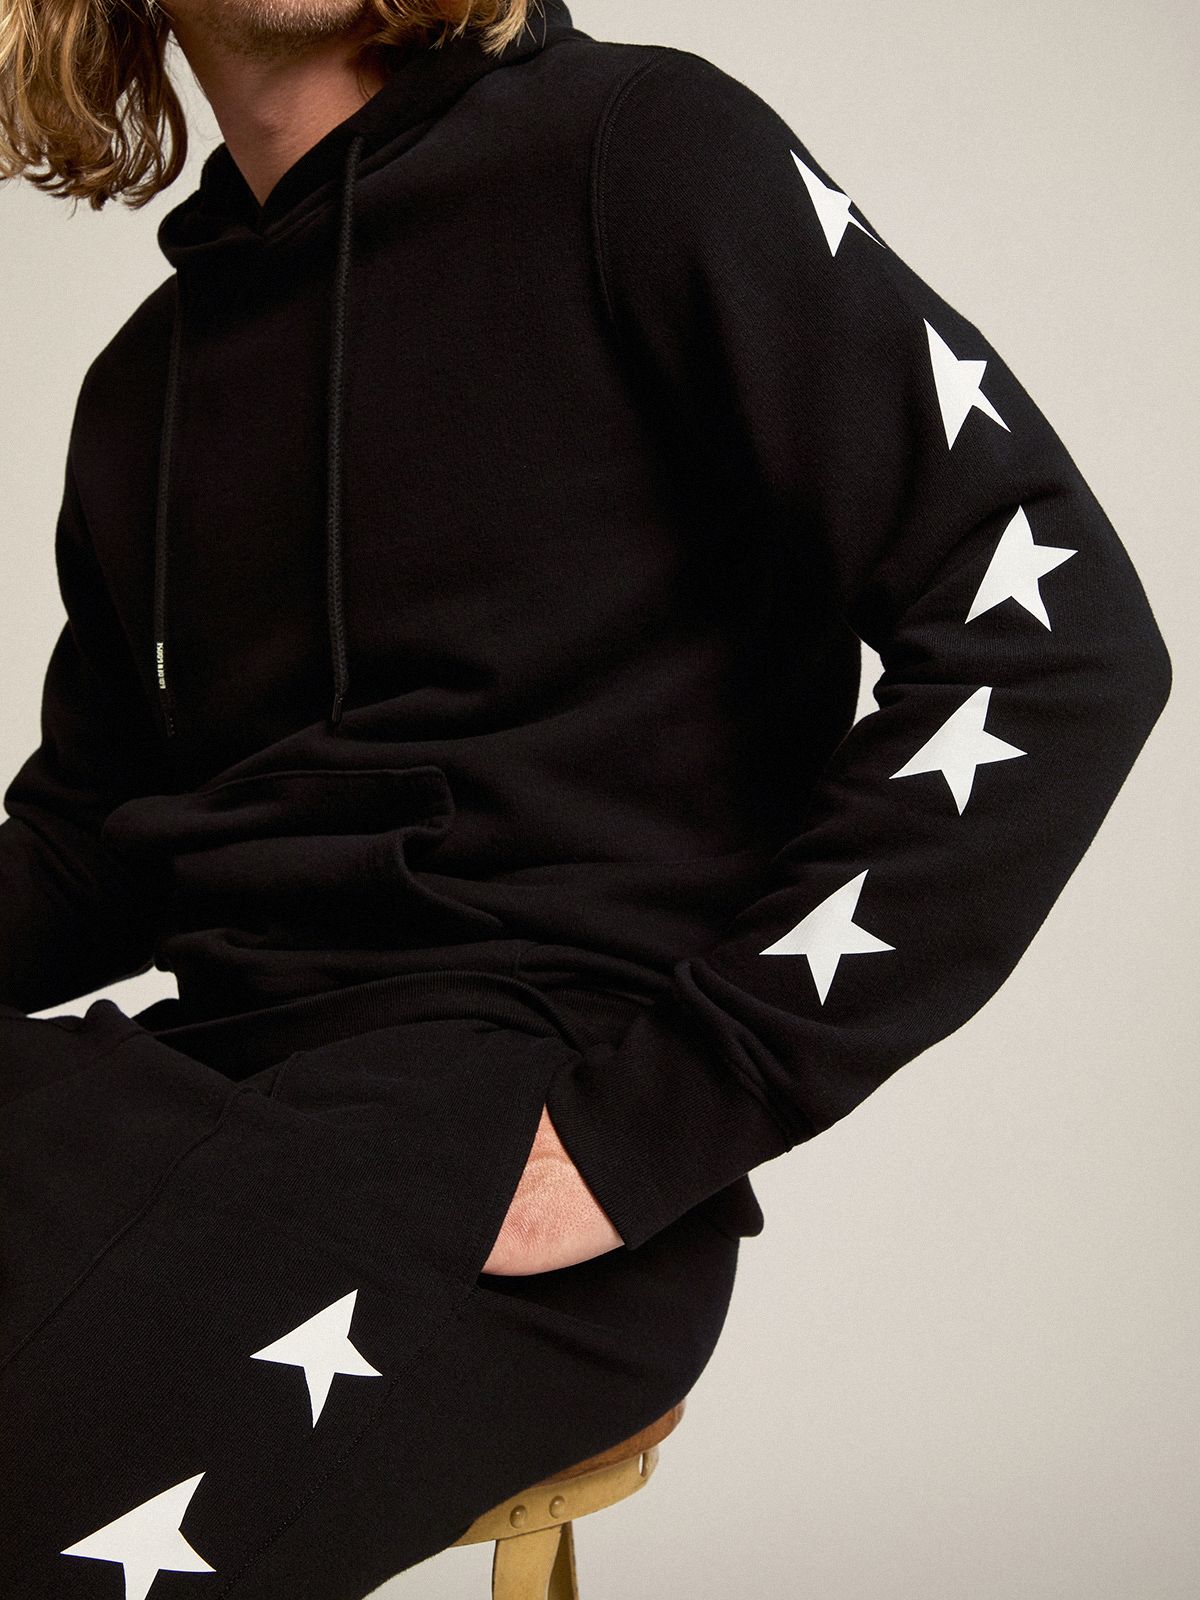 Black Doro Star Collection jogging pants with contrasting white stars